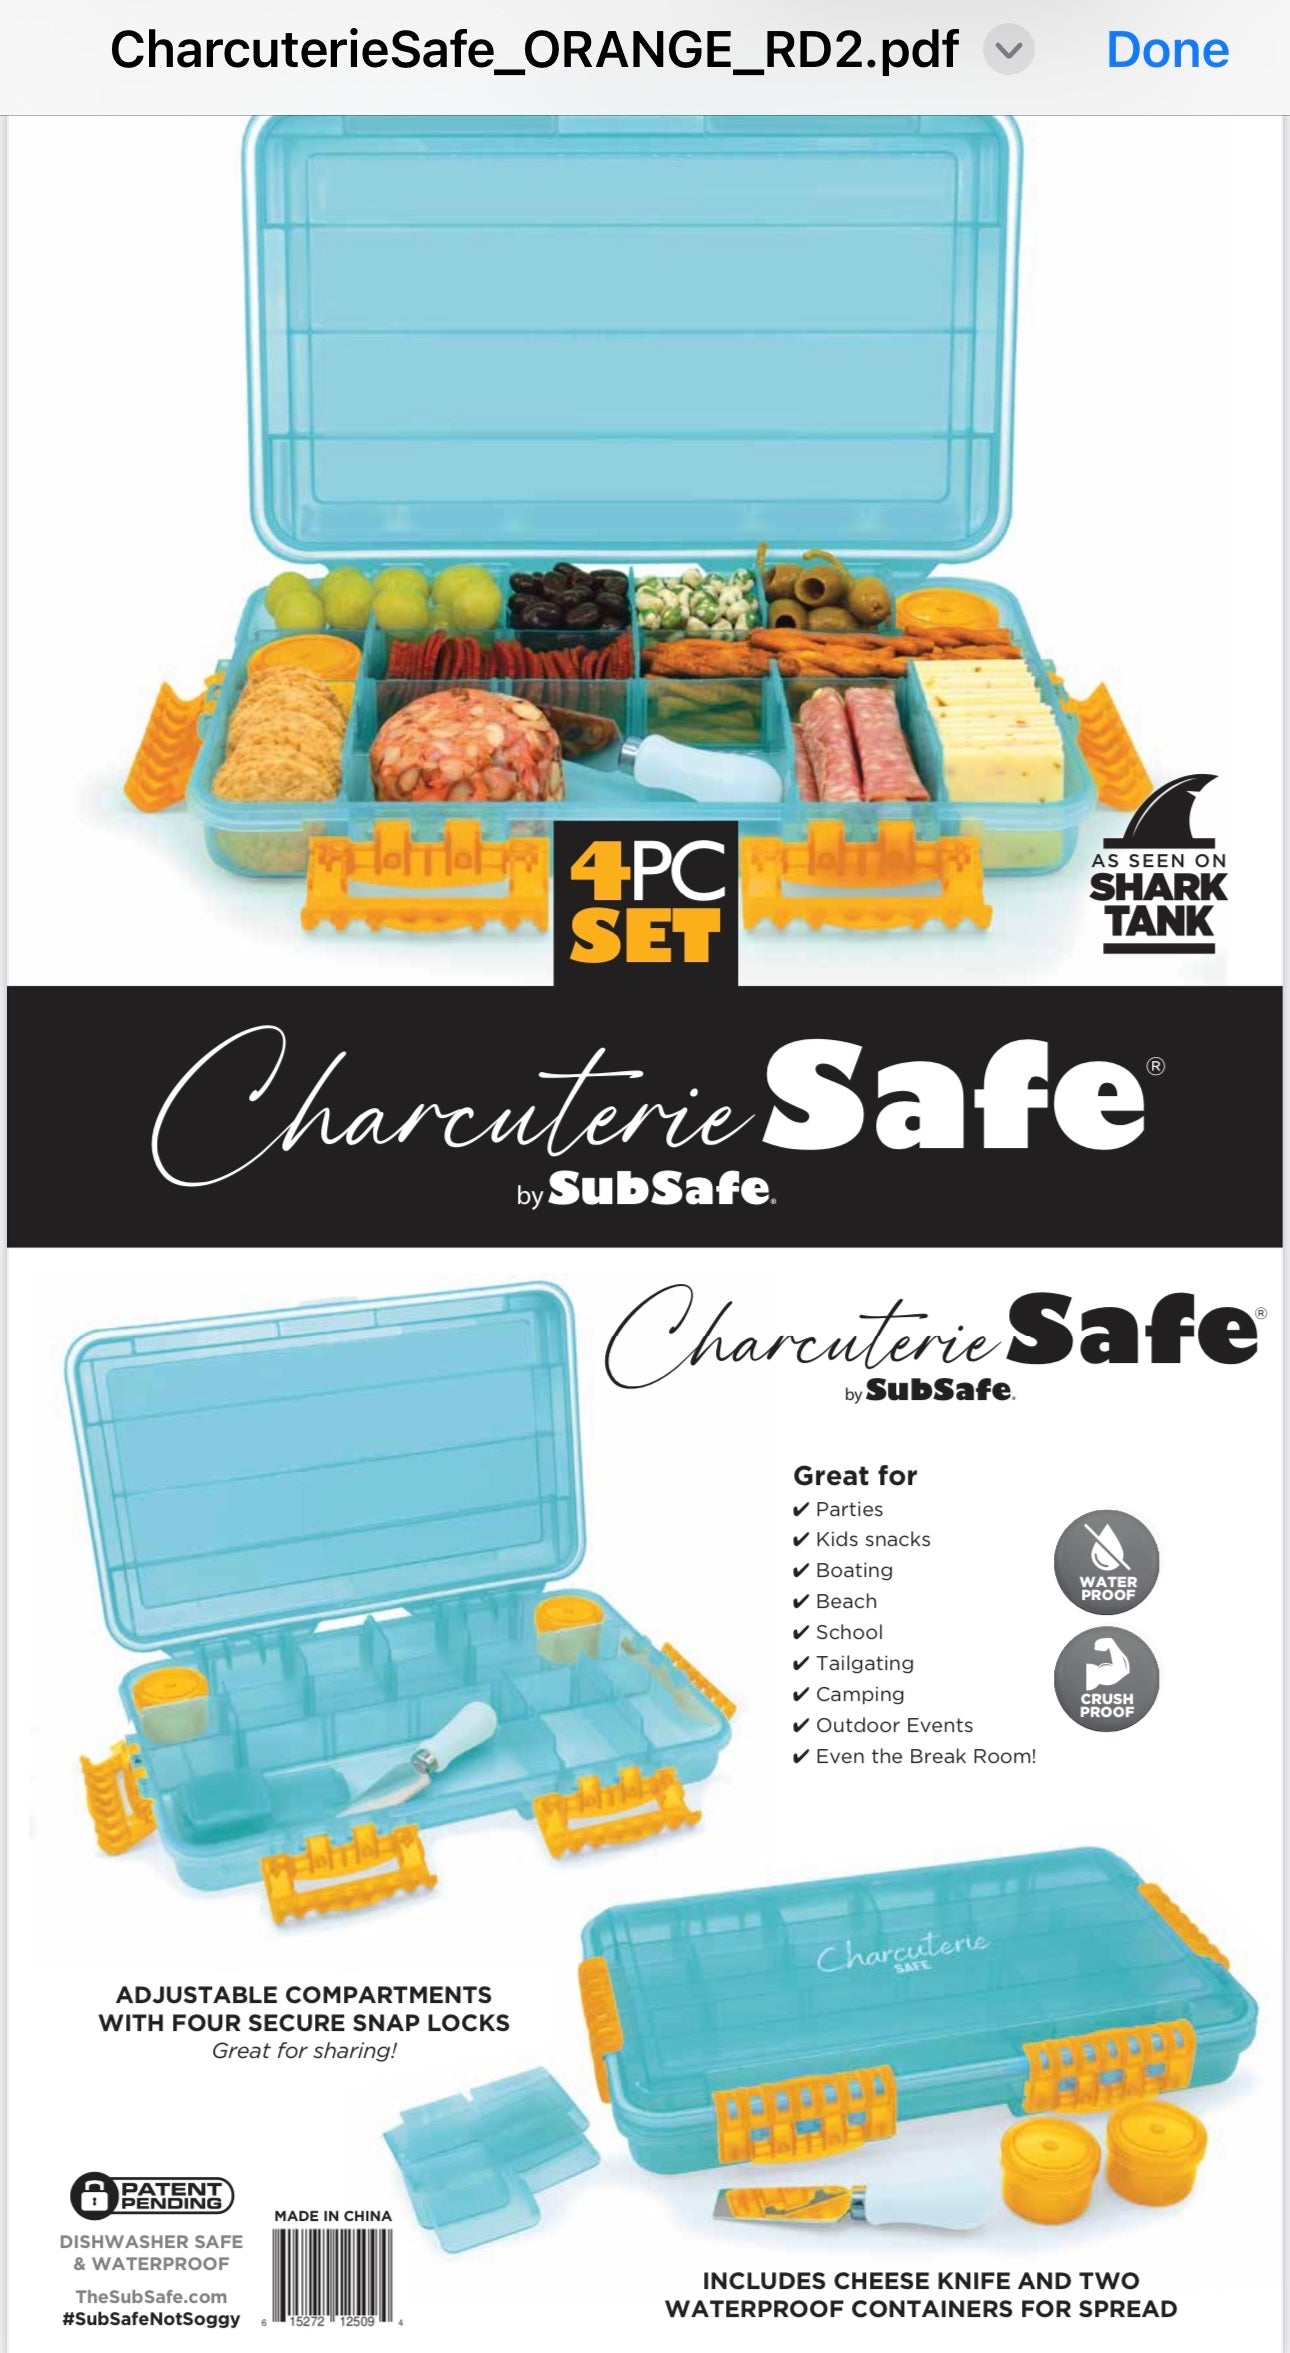 Charcuterie Safe by SubSafe - Waterproof Tackle Box Container Keeps Snacks  Fresh & Dry on The Go - Fill with Cured Meats, Cheese, Nuts - Perfect for, Snack  Tackle Box For Kids